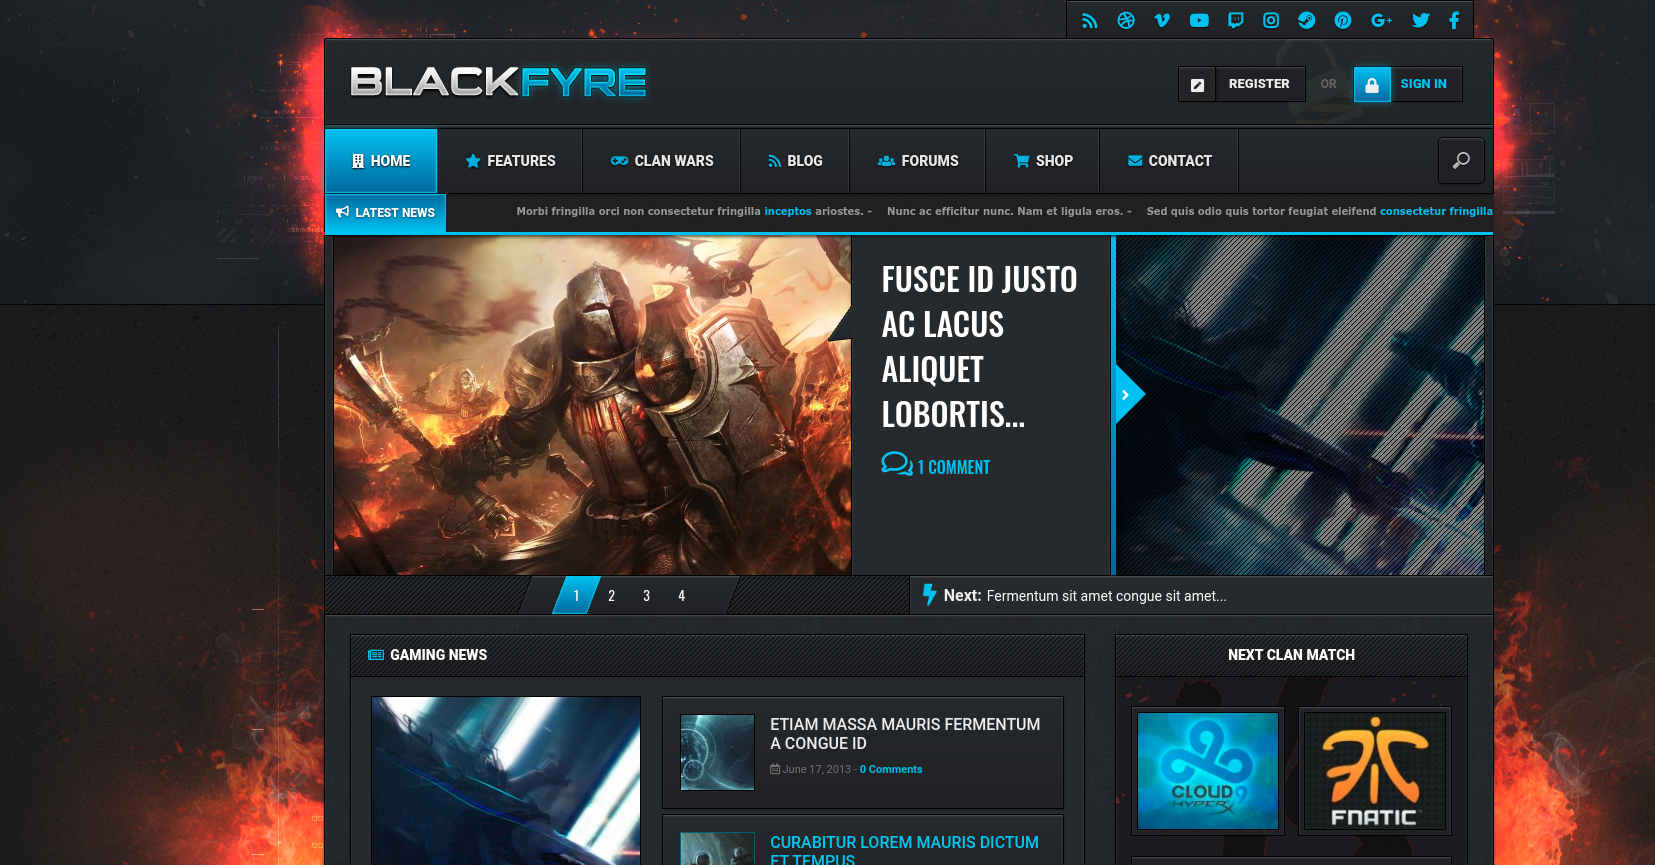 Video Games Website Template with Dark Background and Big Footer - MotoCMS